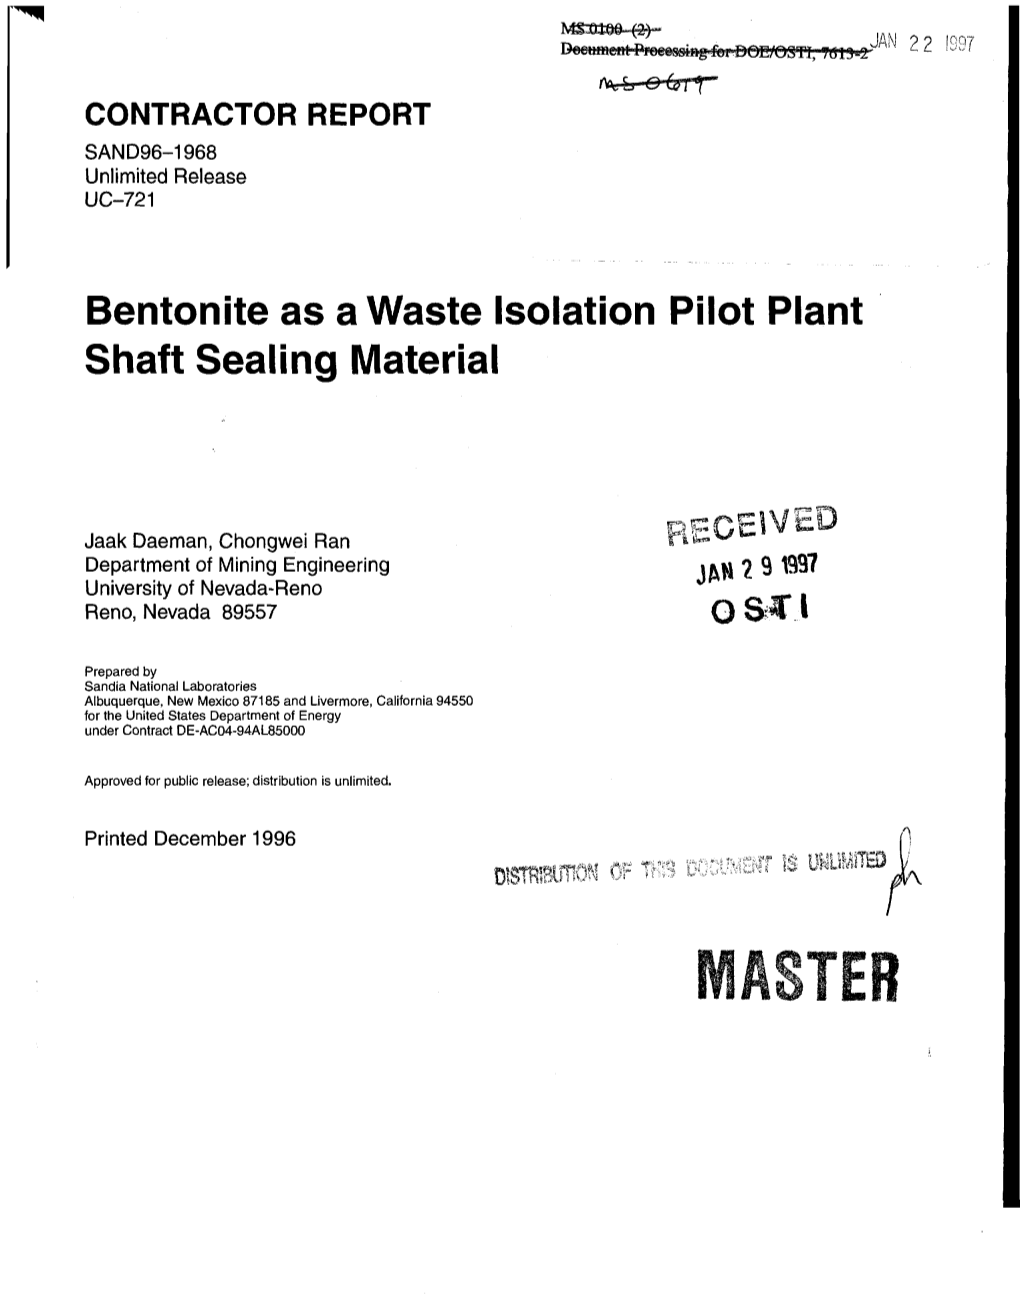 Bentonite As a Waste Isolation Pilot Plant Shaft Sealing Material